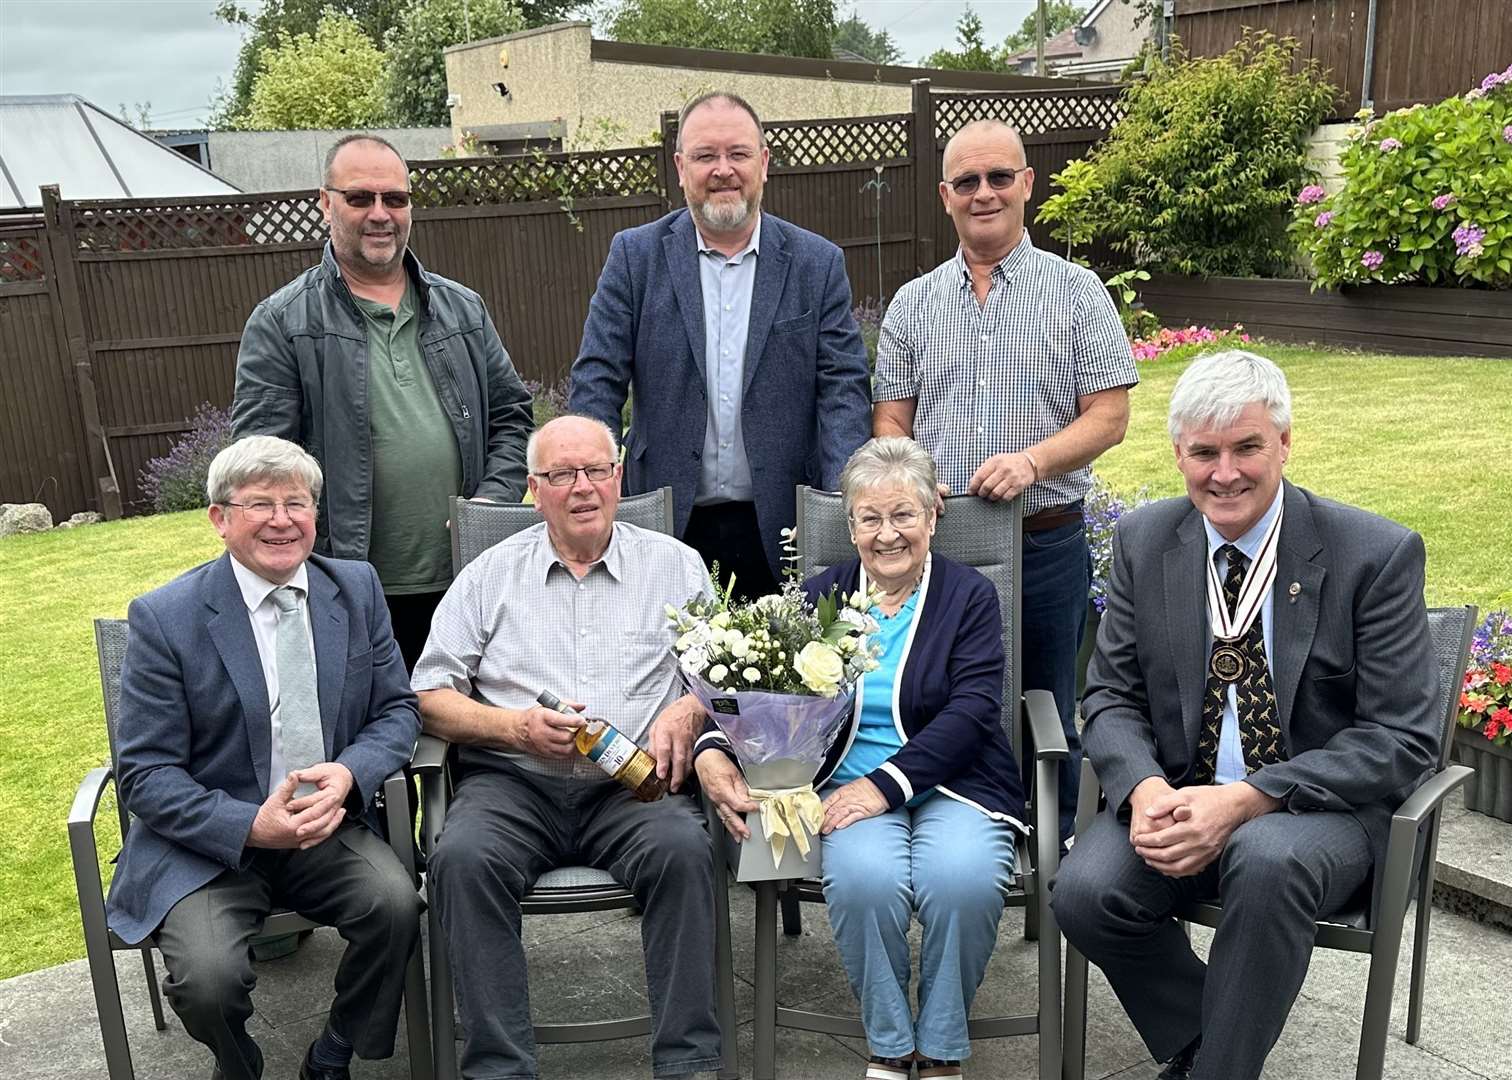 Norman and Anne Duguid (nee Barron), with Turriff & District Councillor, Iain Taylor, Deputy Lieutenant, Steve Mackison. Also joined by their youngest son, Banff & Buchan MP, David Duguid and his brothers Peter (left) and Ian (right)